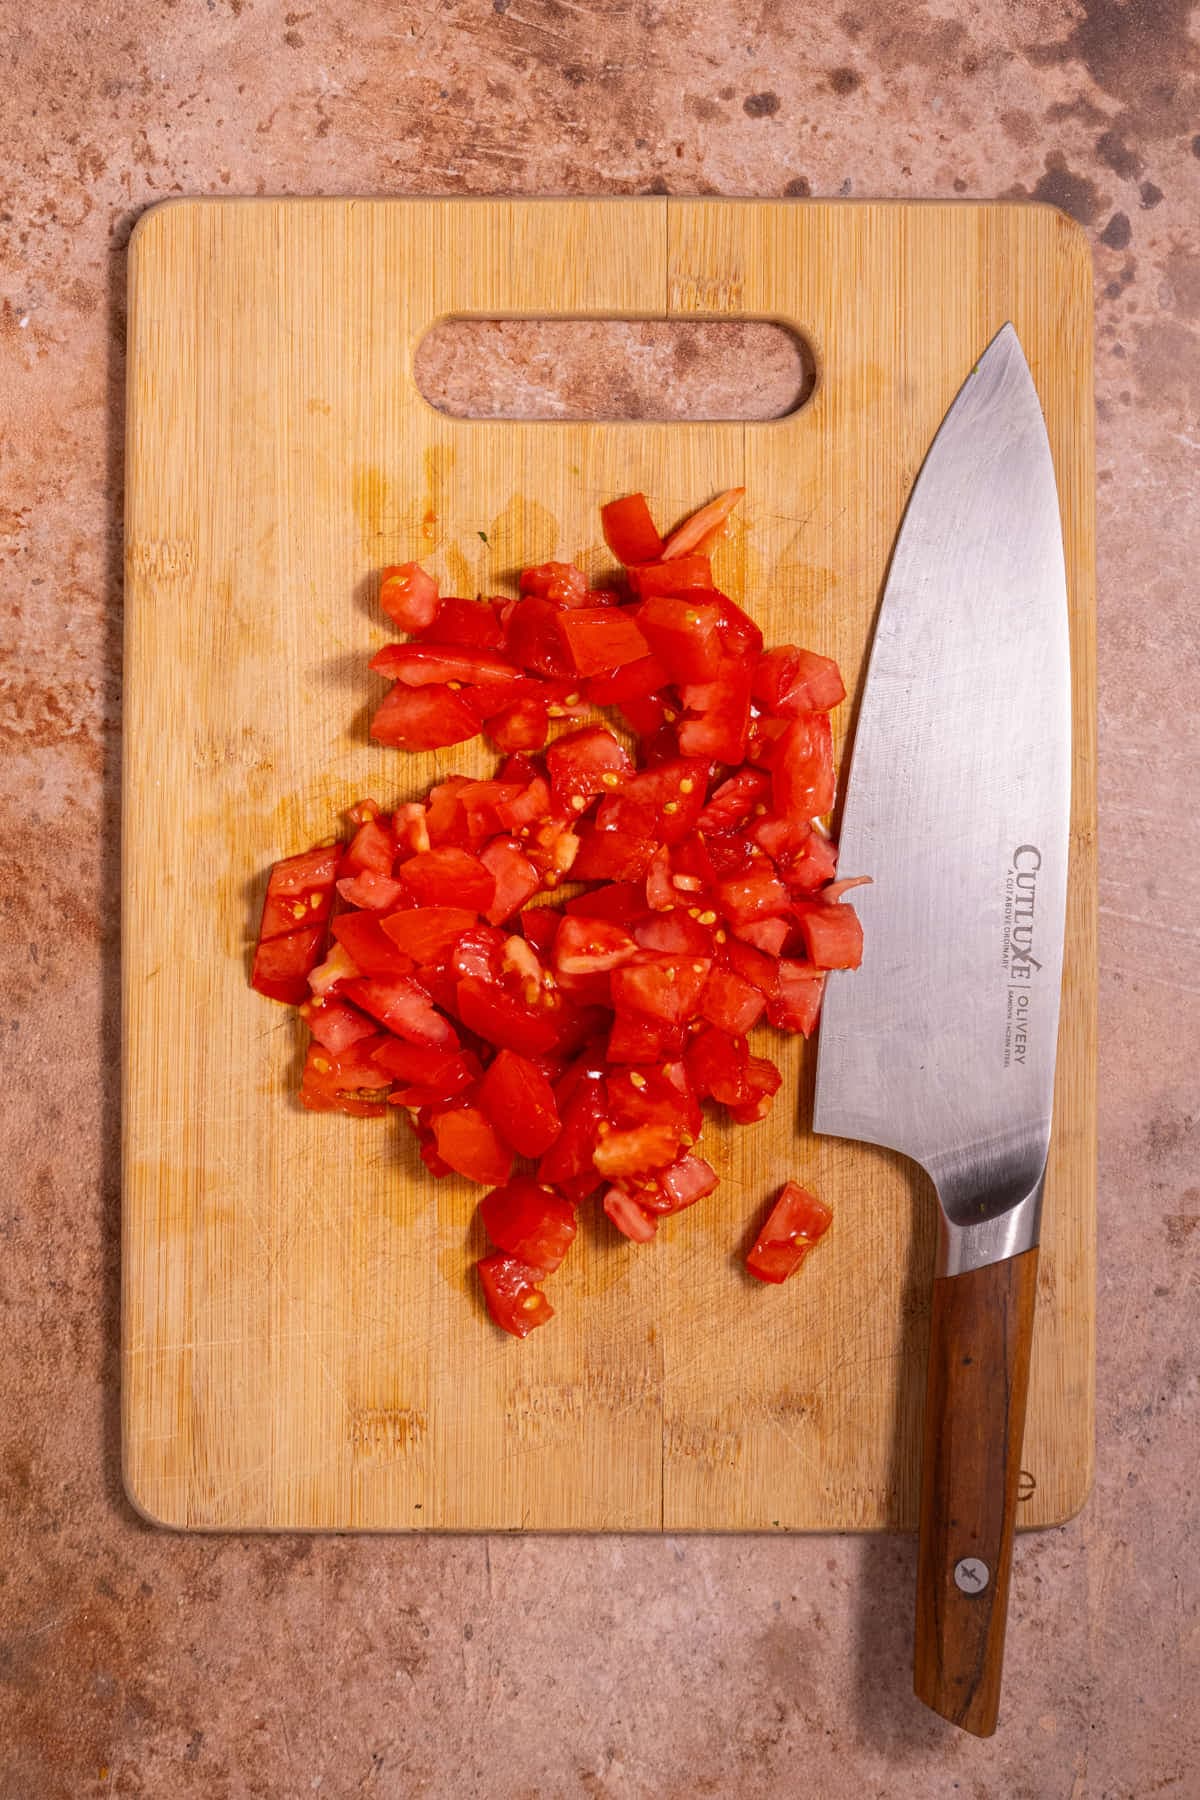 Diced tomato on a cutting board